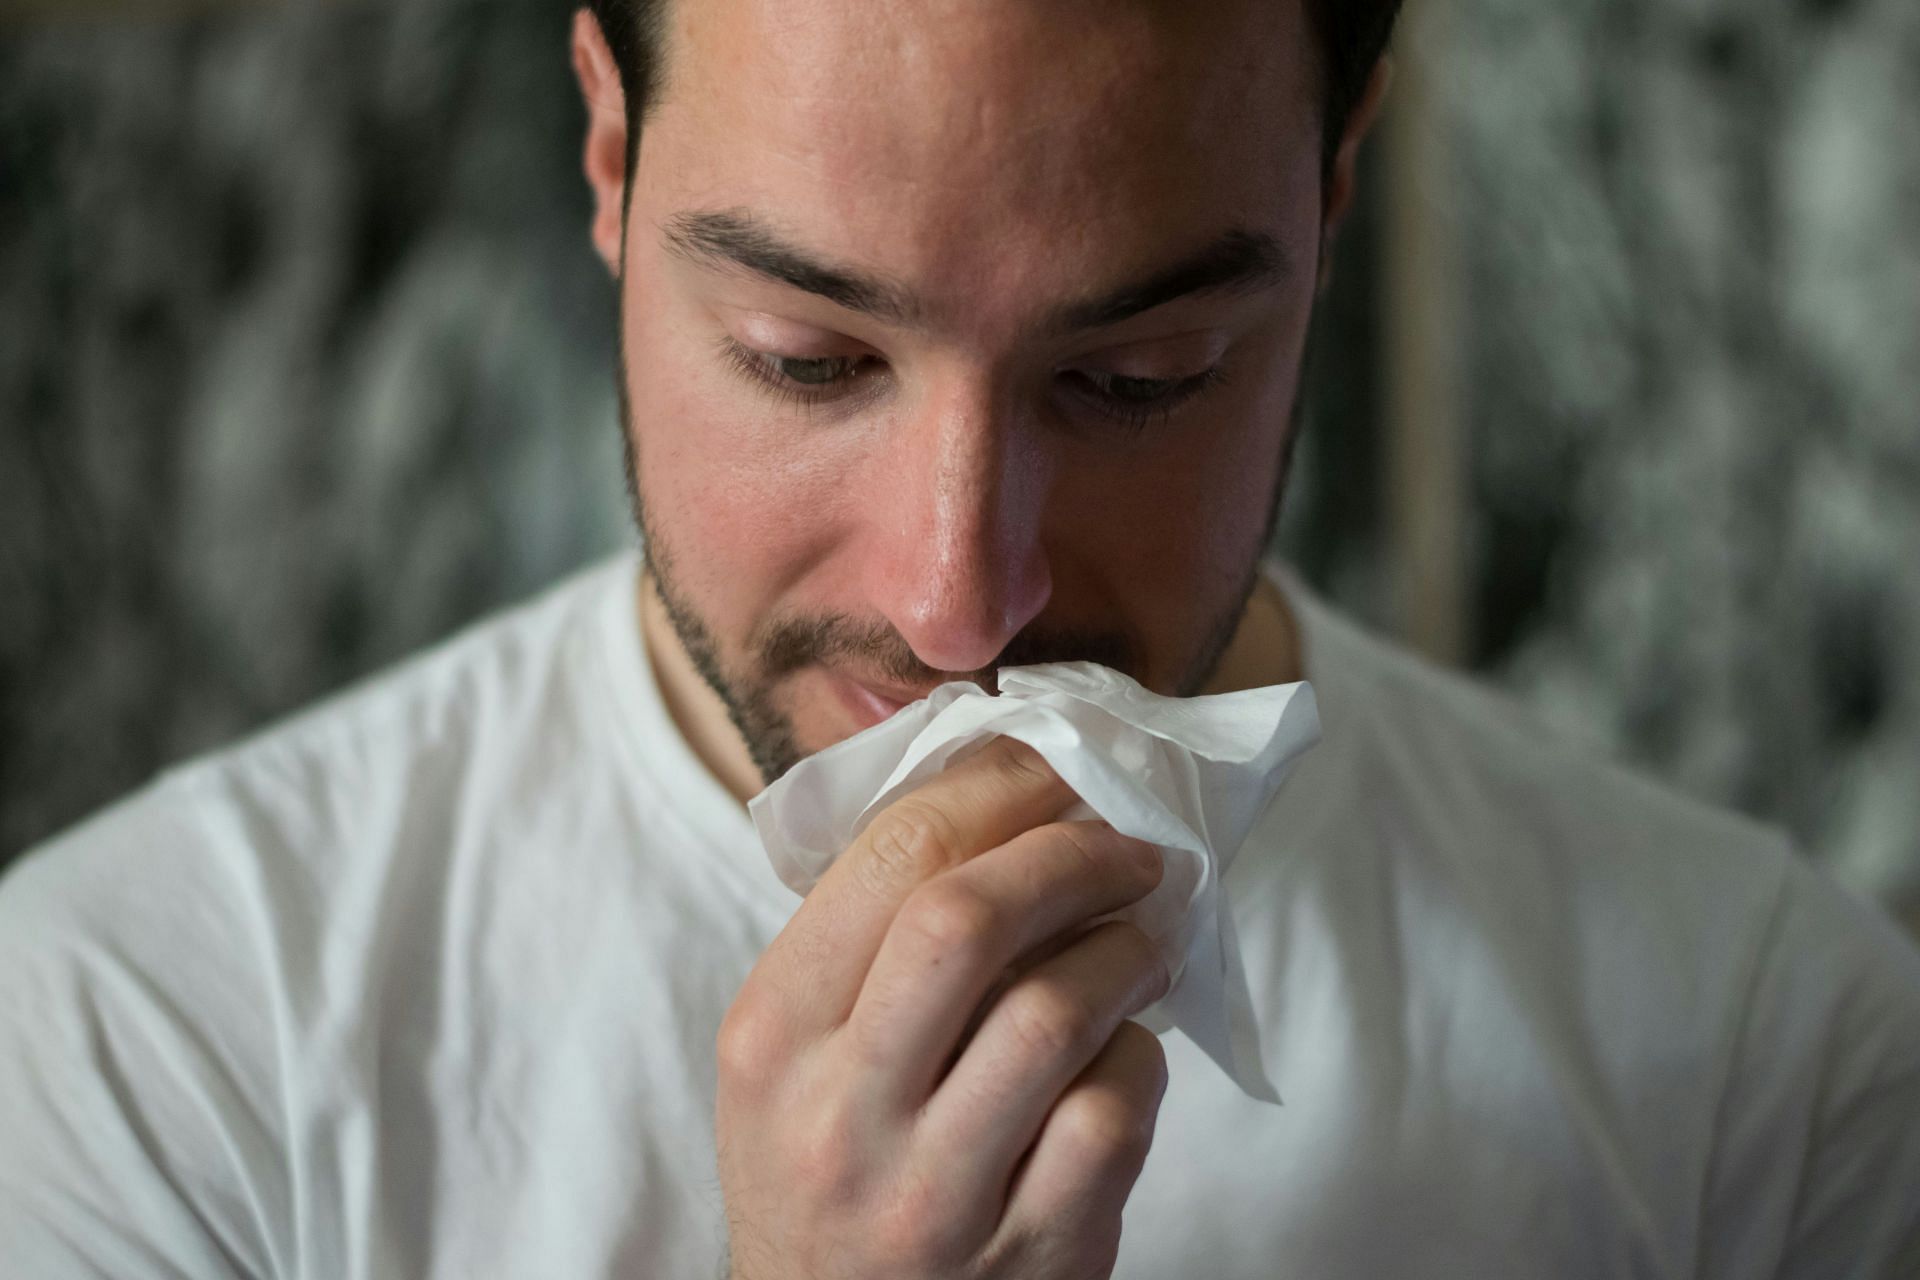 Coughing blood can be a sign of lung abscess (Image by Brittany Colette/Unsplash)